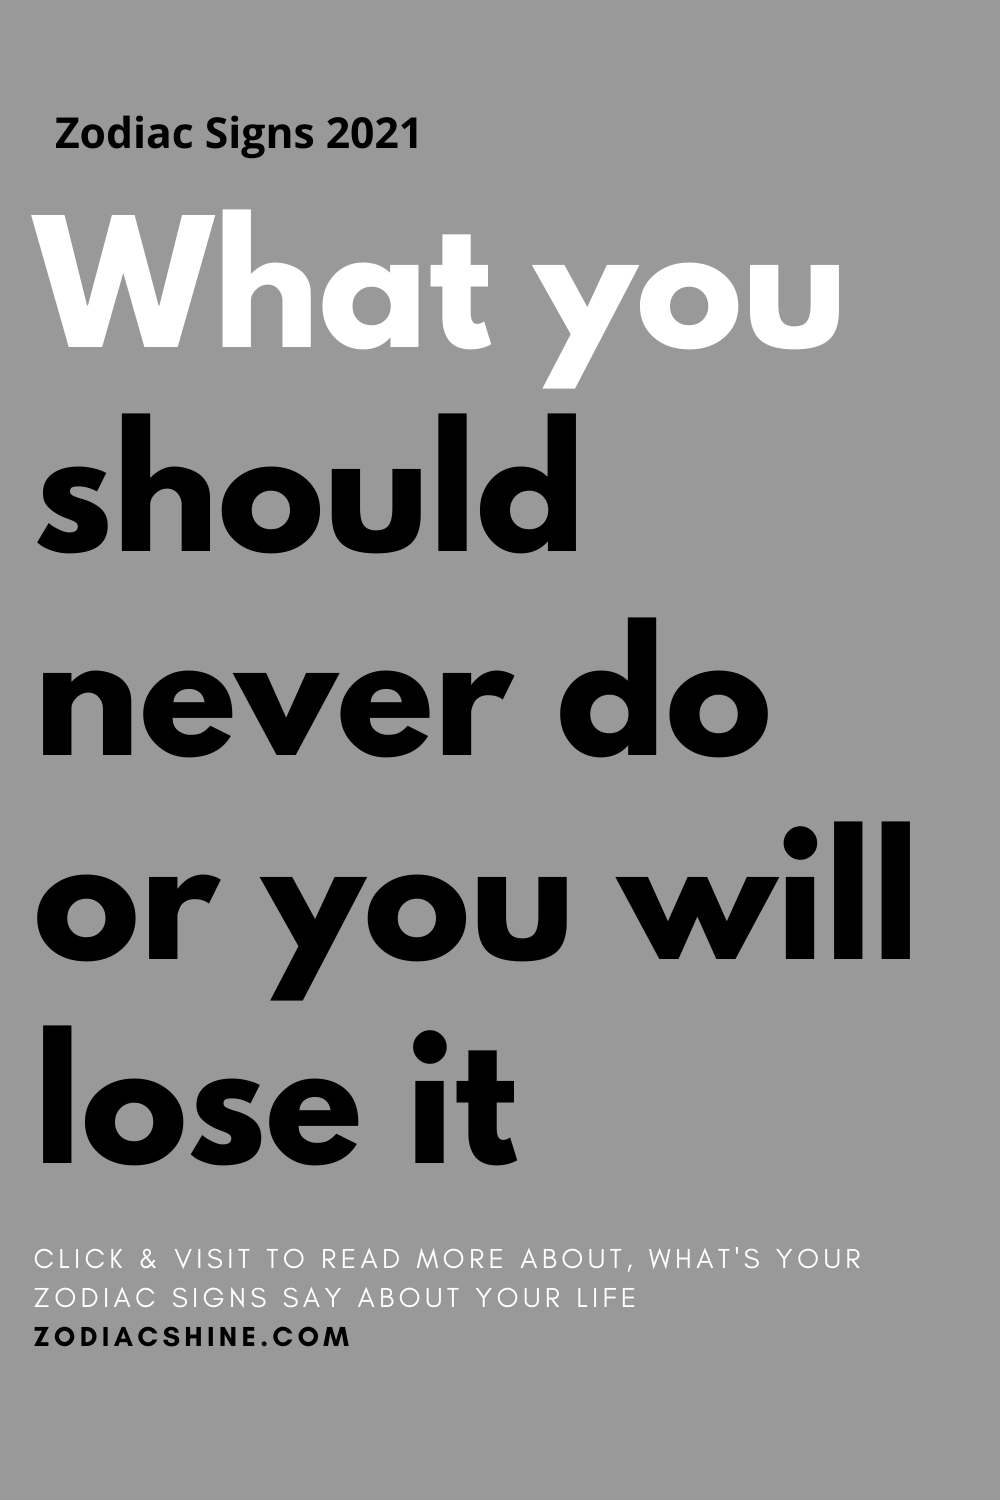 What you should never do or you will lose it